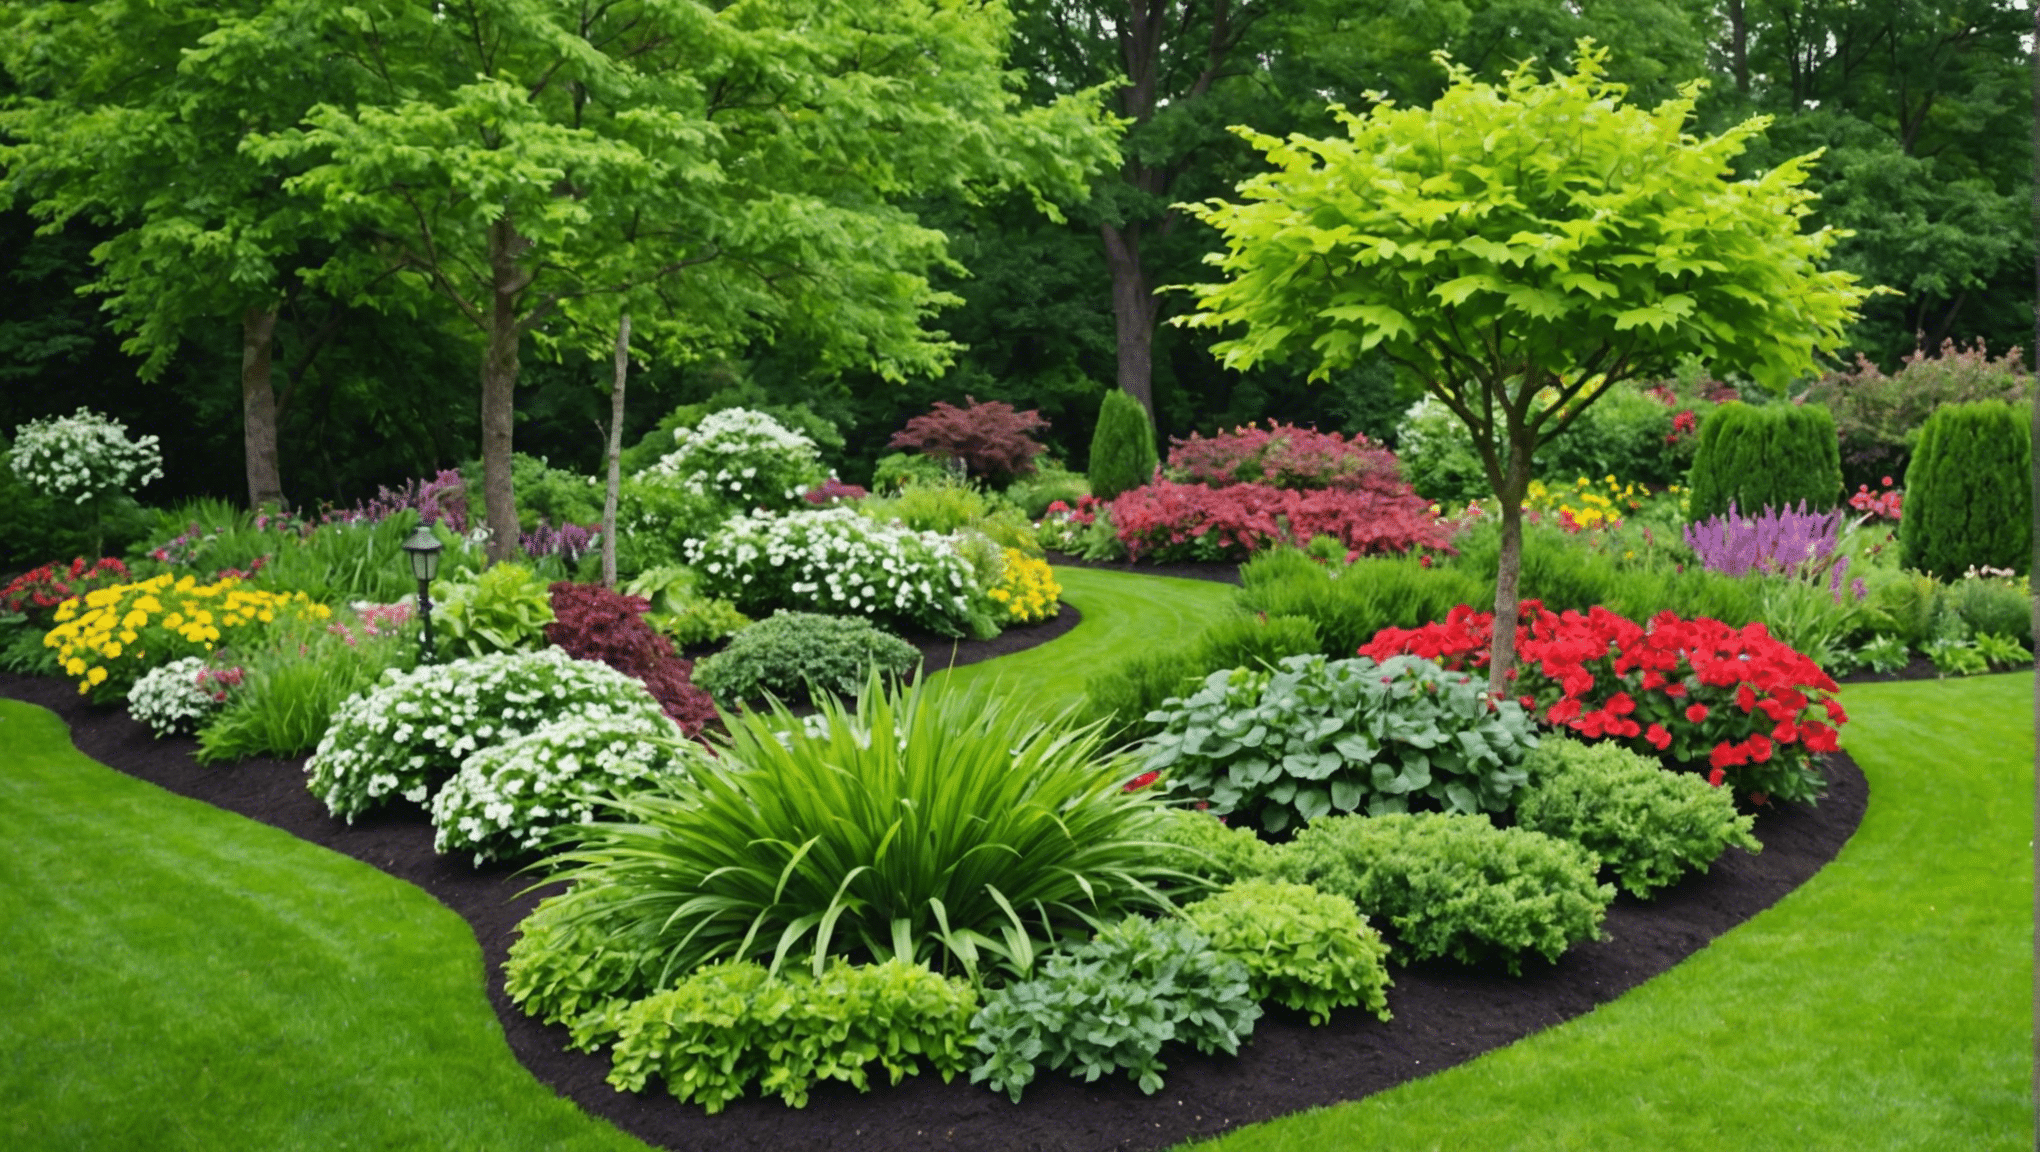 discover fascinating gardening facts and tips to enhance your gardening experience. from unique plant varieties to surprising gardening techniques, find out more here.